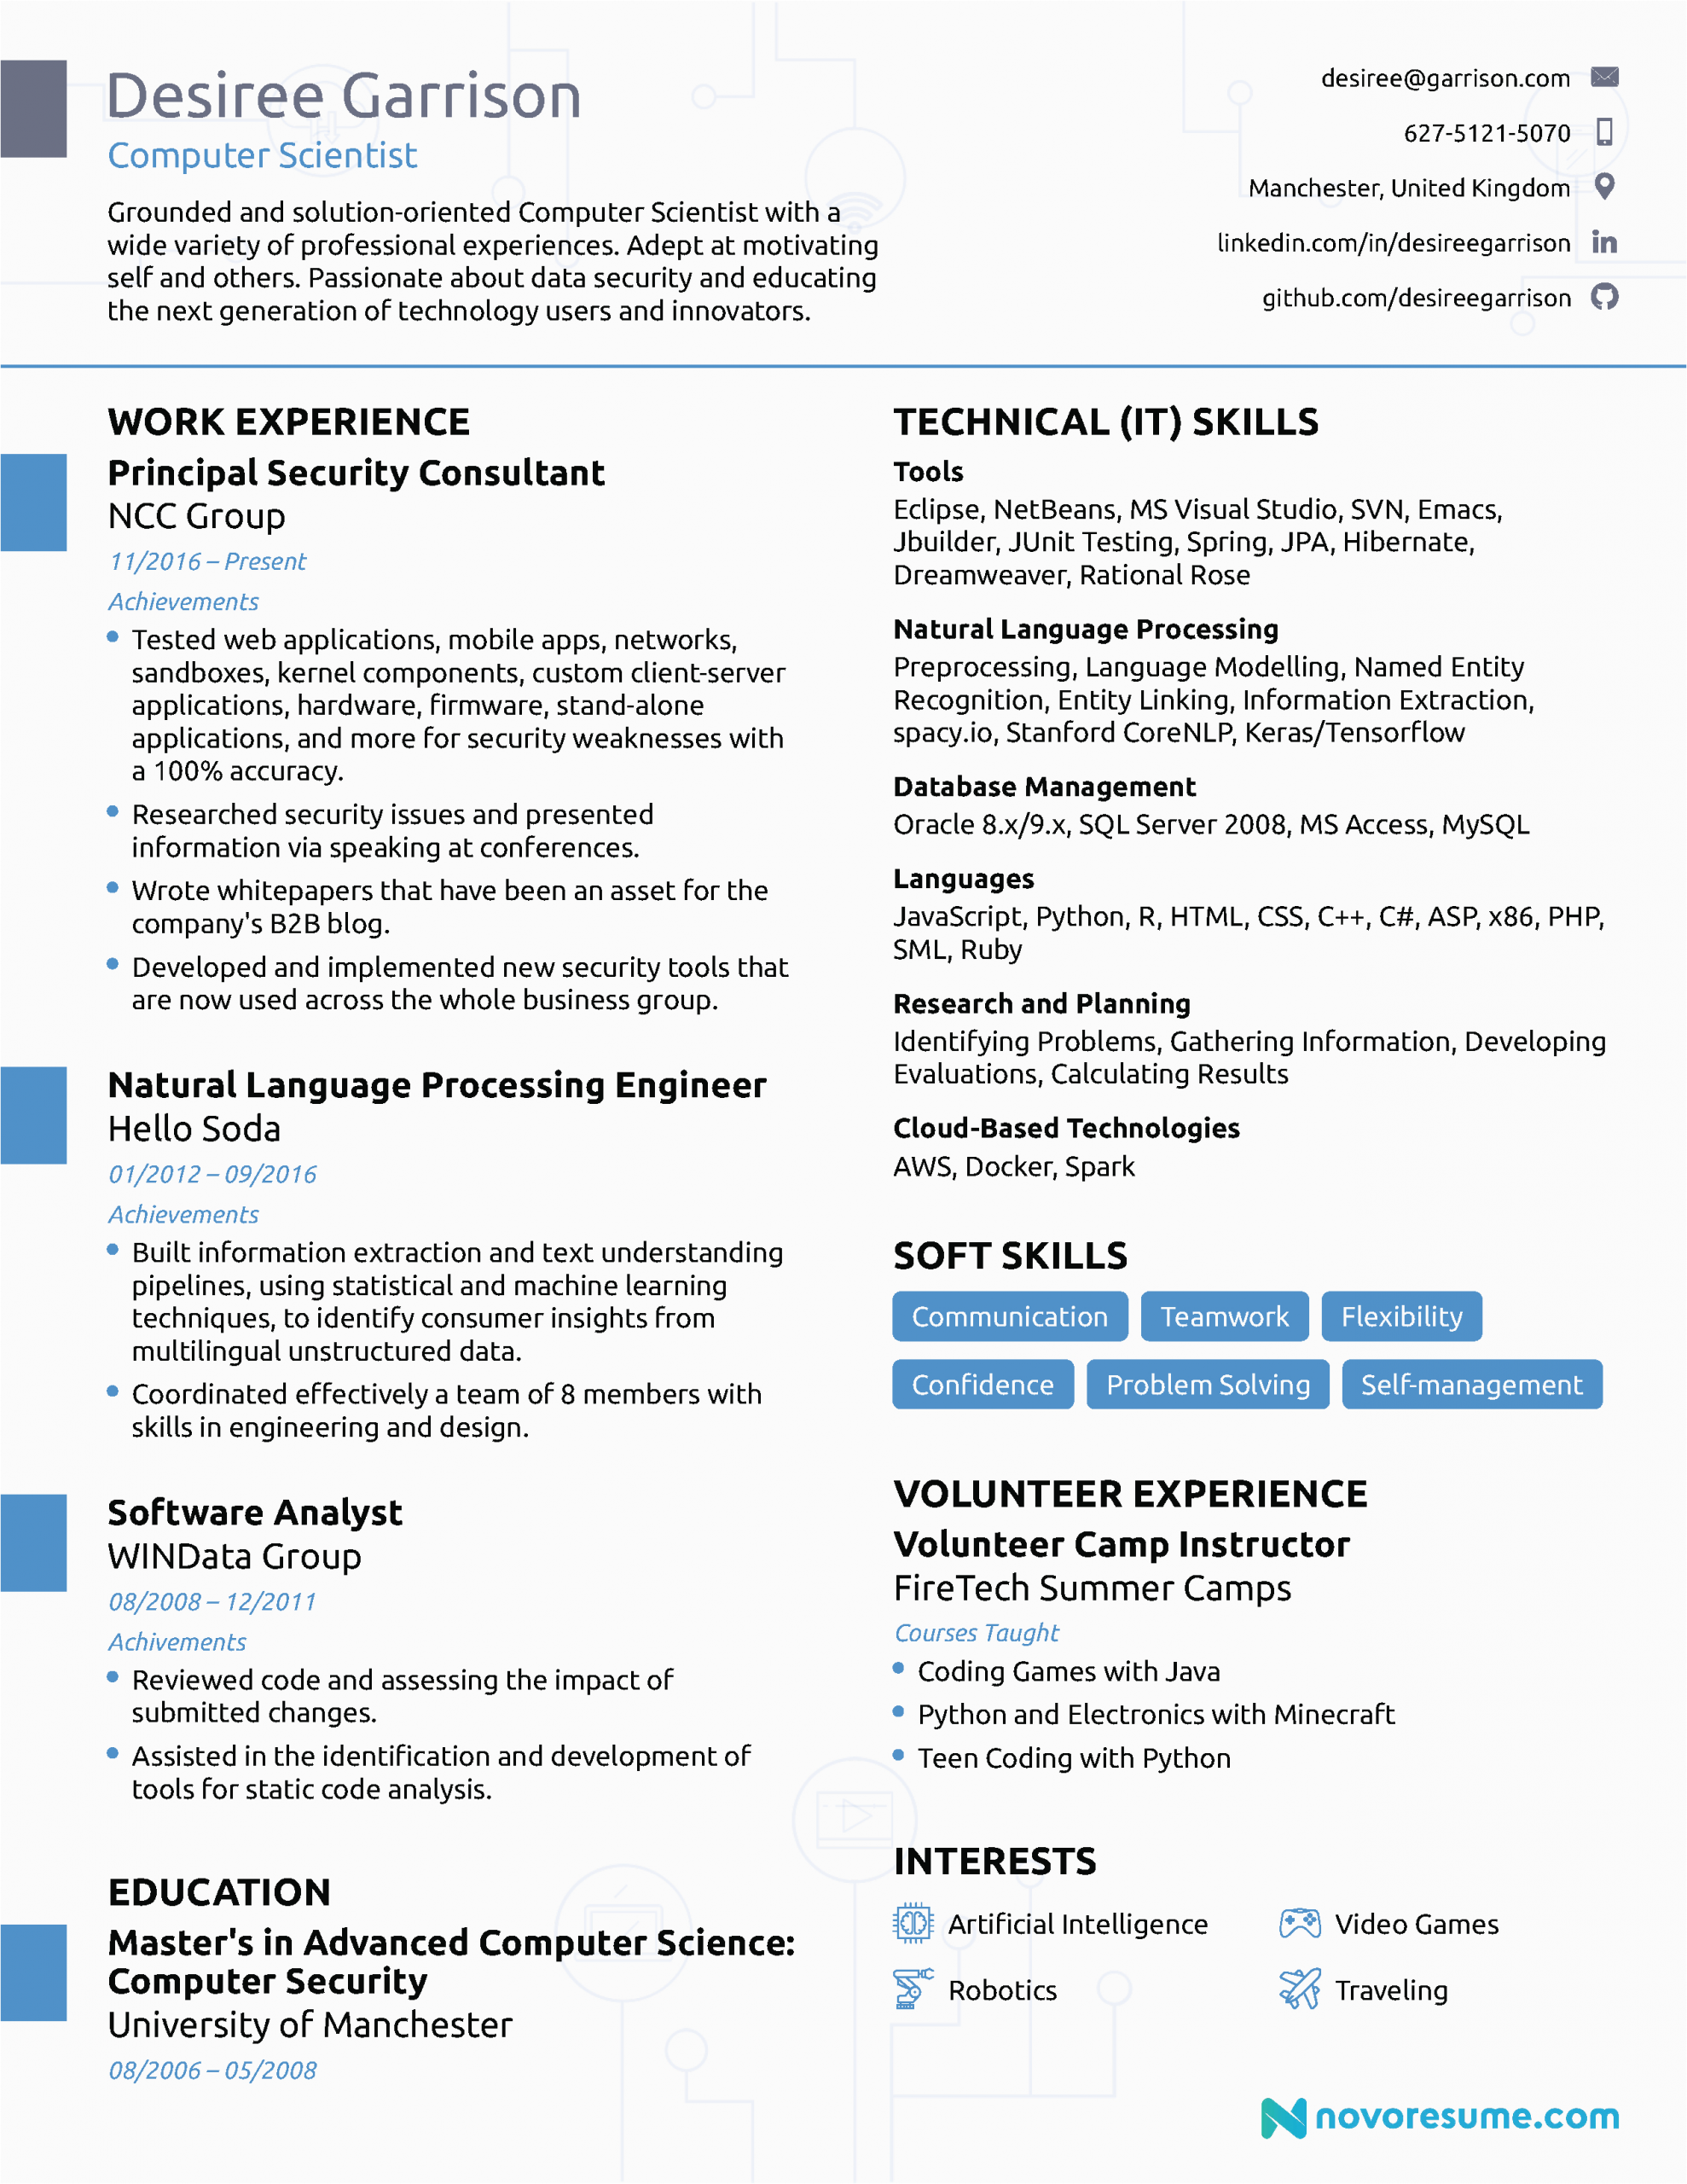 Sample Resume for Computer Science Student Puter Science Resume [2020] Guide & Examples